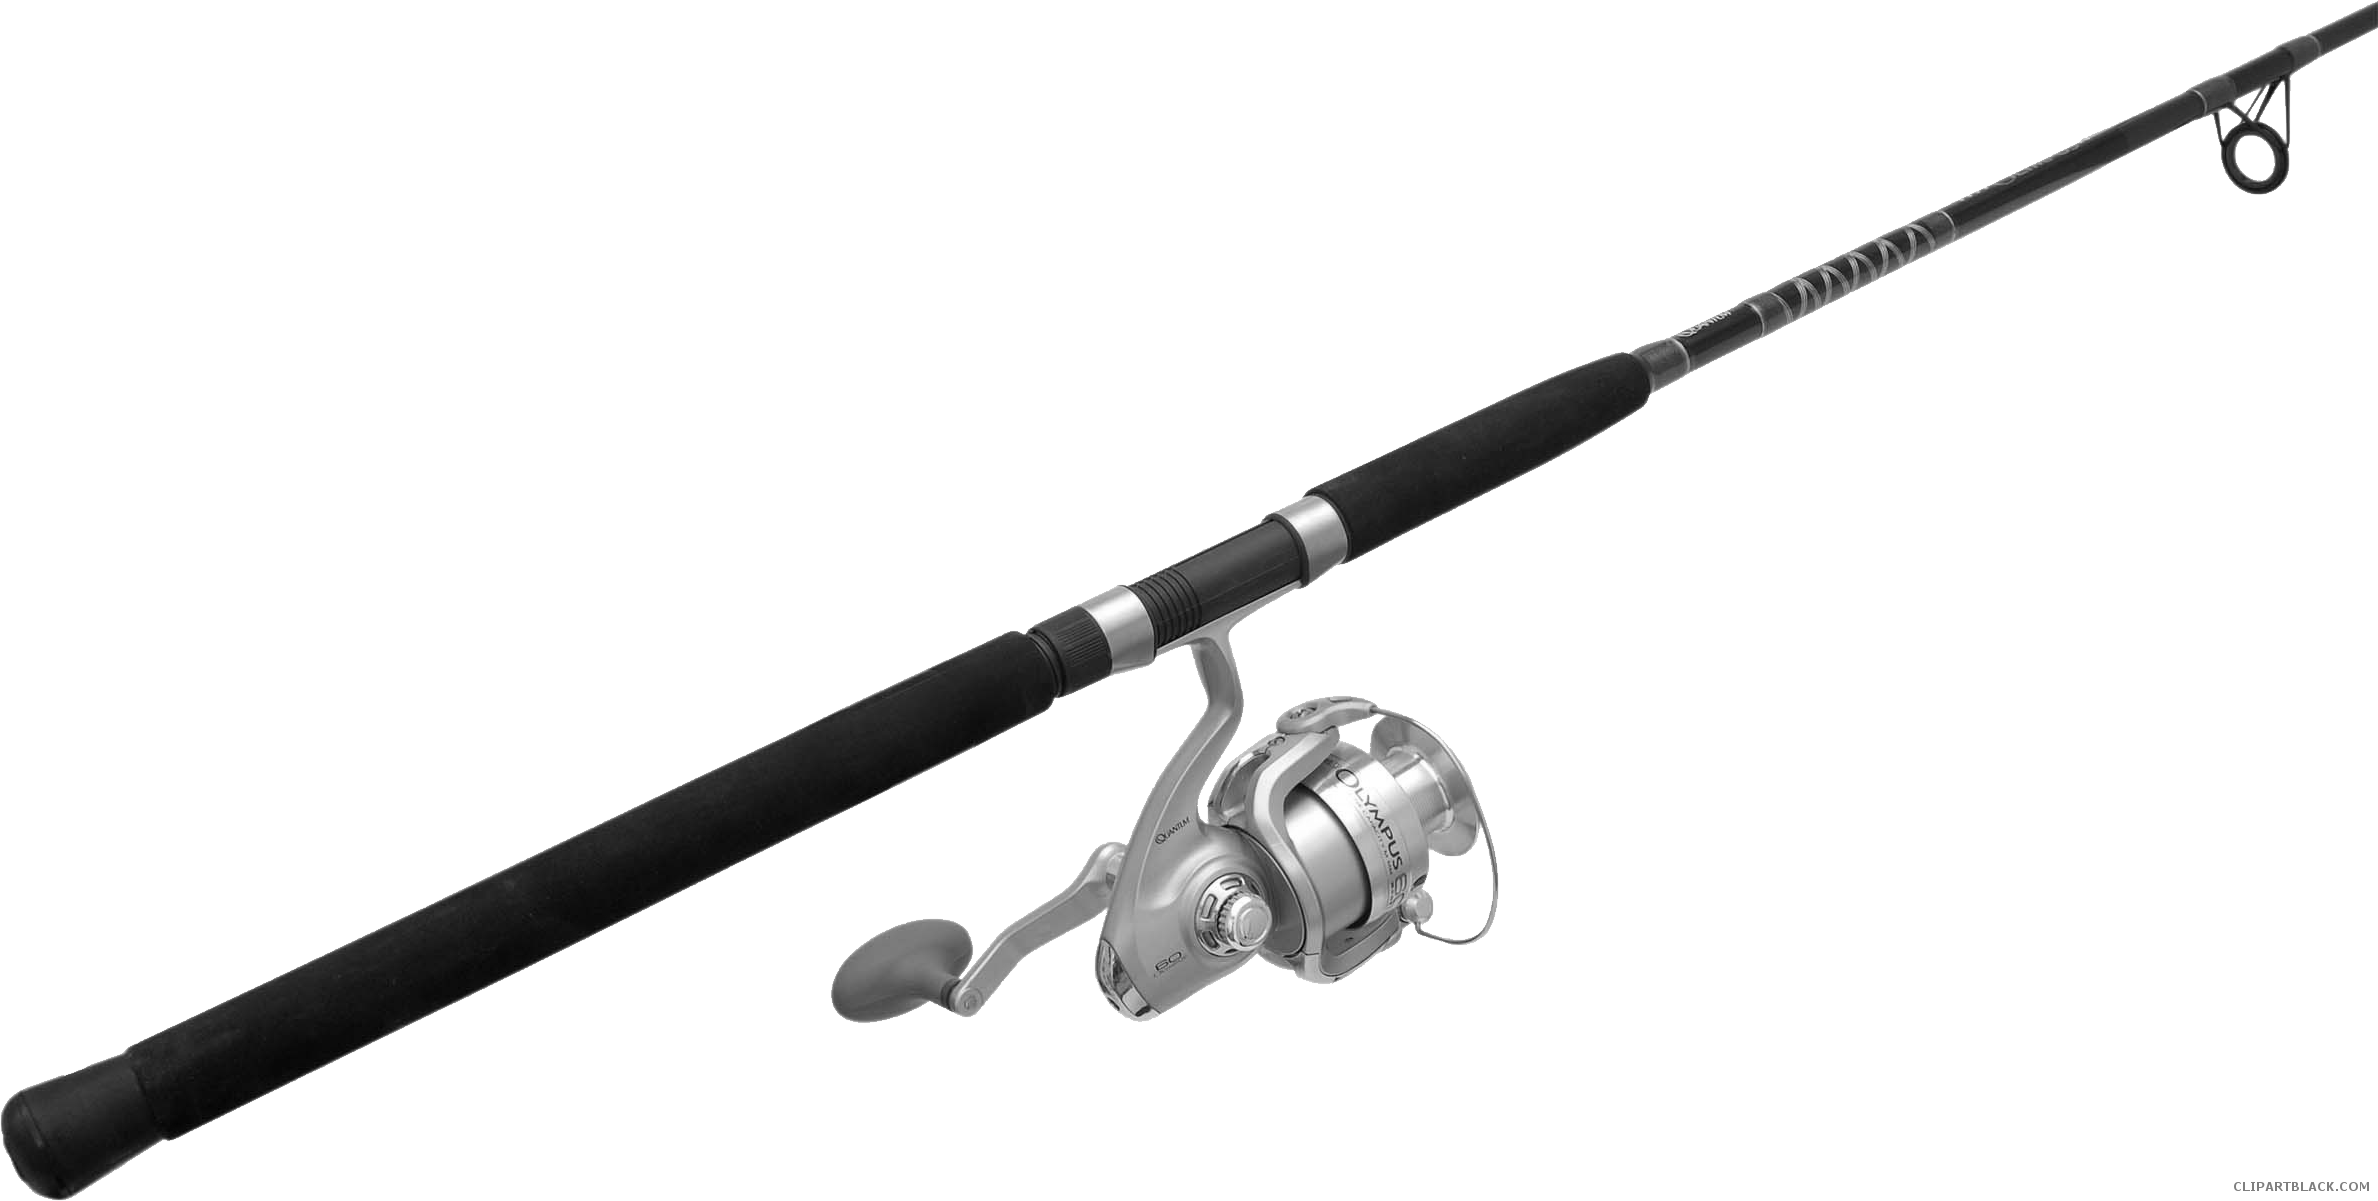 Fishing clipart fishing pole. Page of clipartblack com